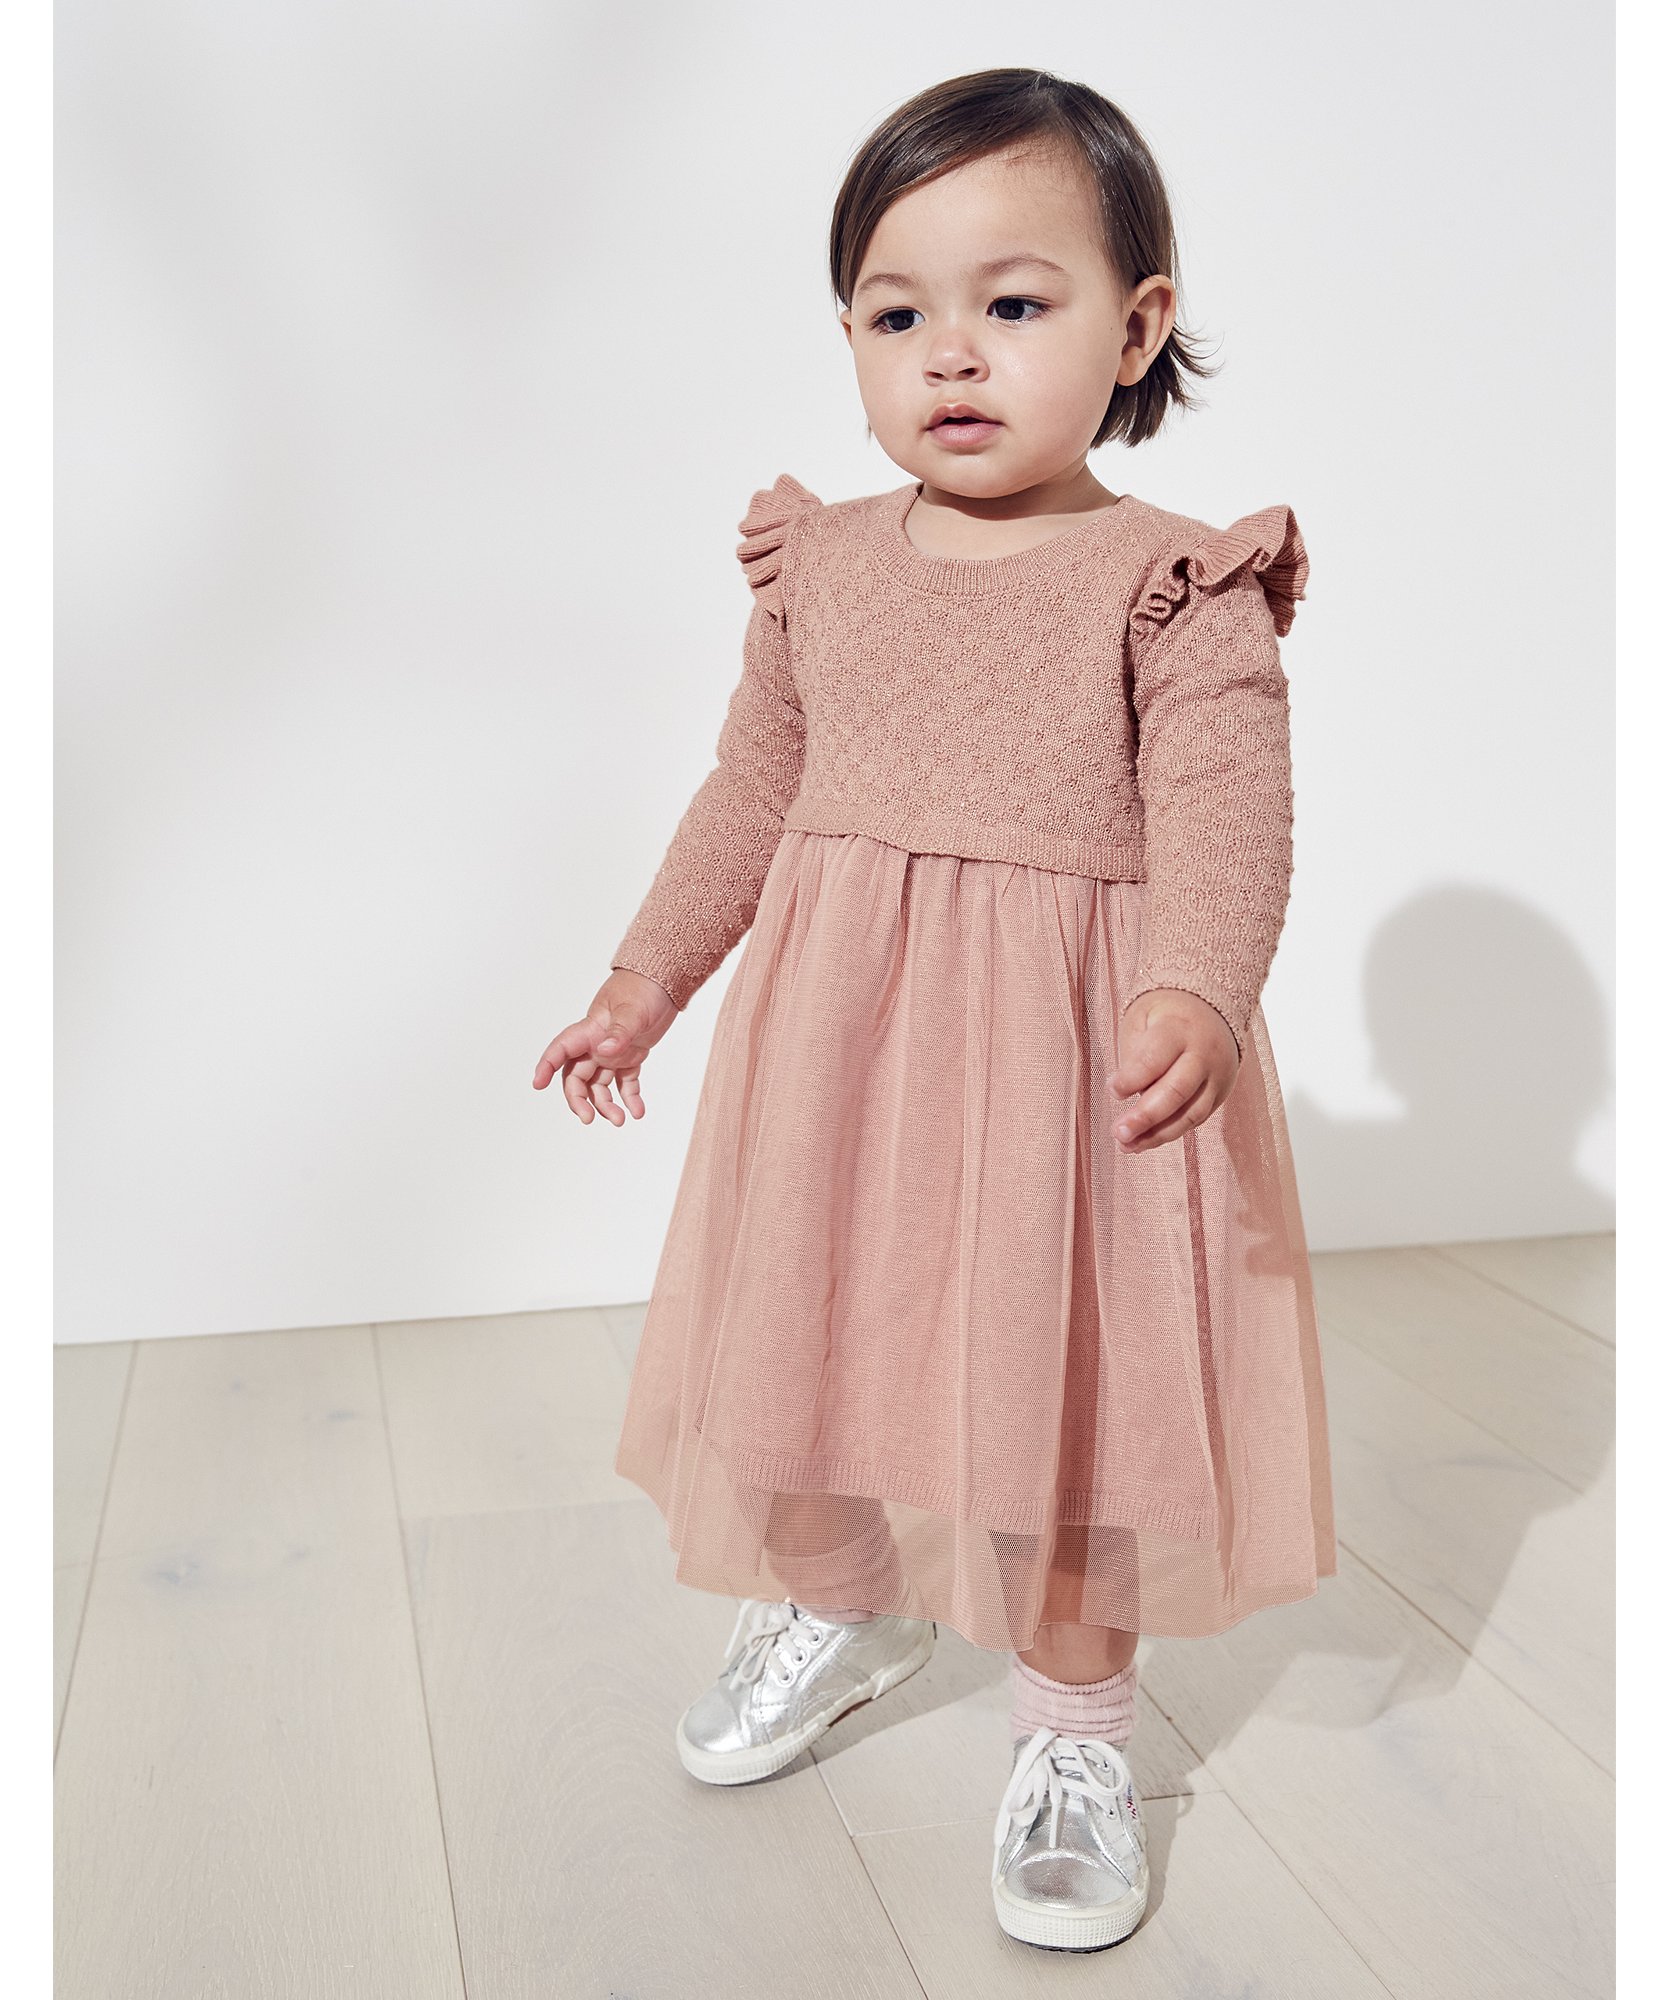 The White Company Clothing Dresses Knitted Dresses 0-18mths 1-1 1/2Y Textured Knit & Tulle Dress 